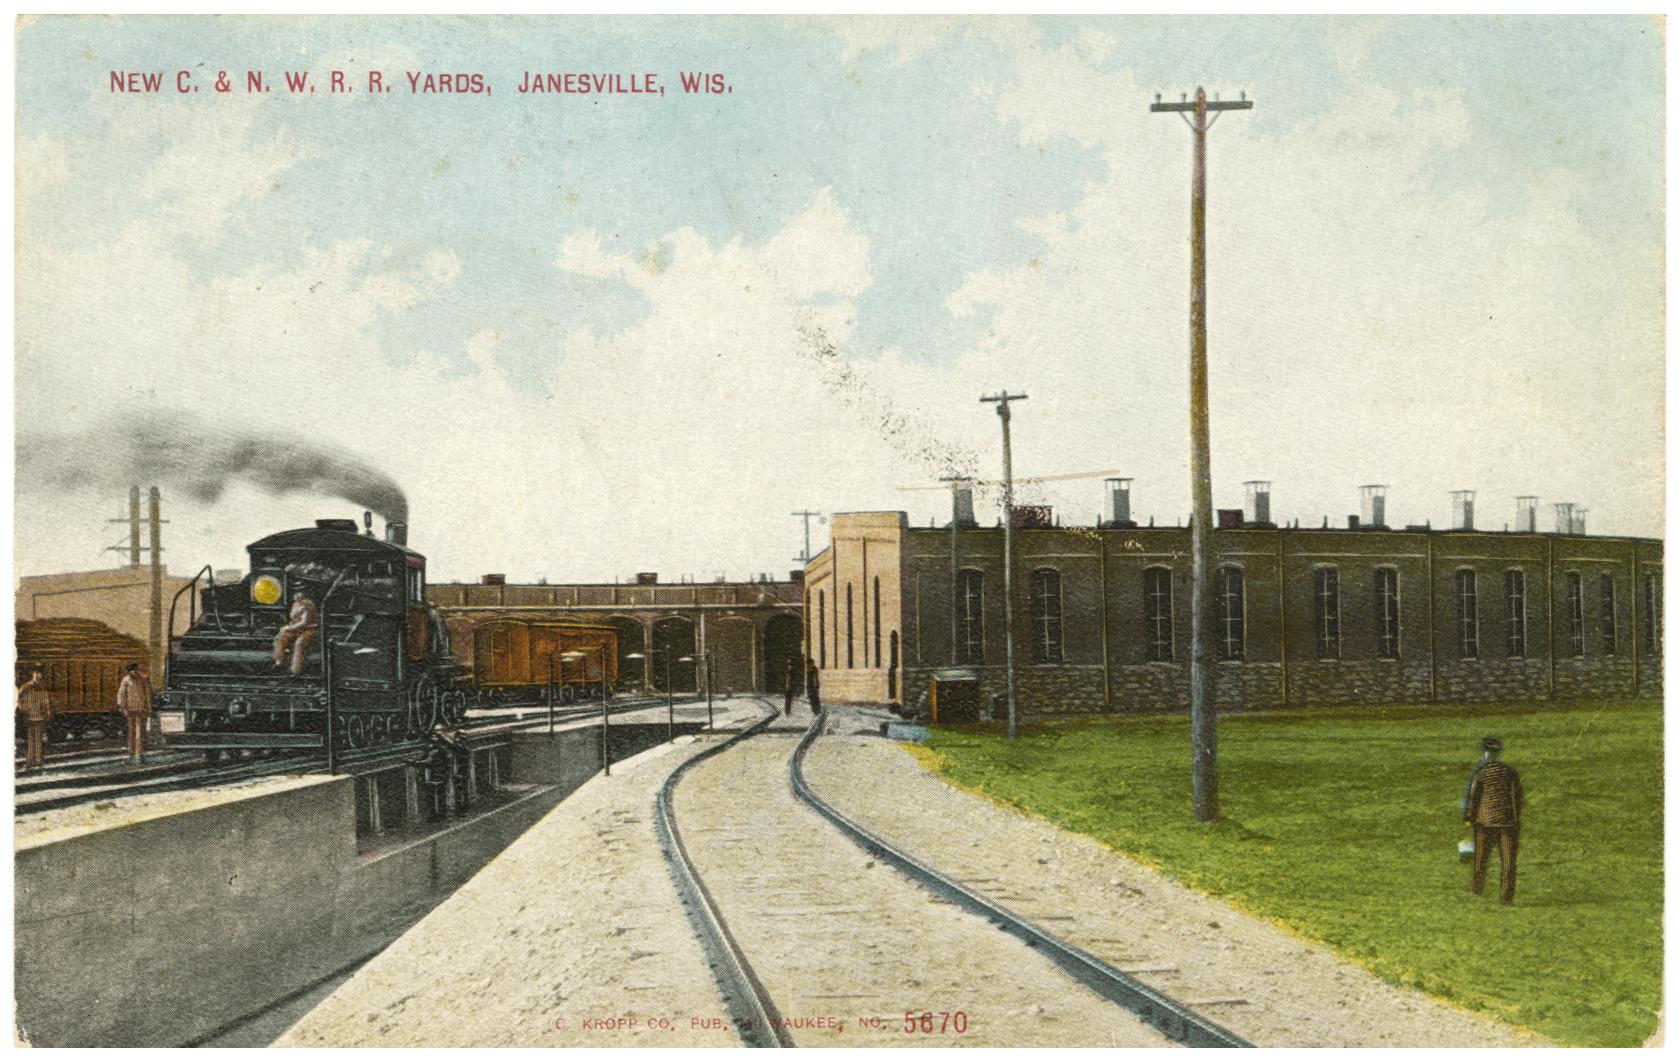 Railroad roundhouse in Janesville